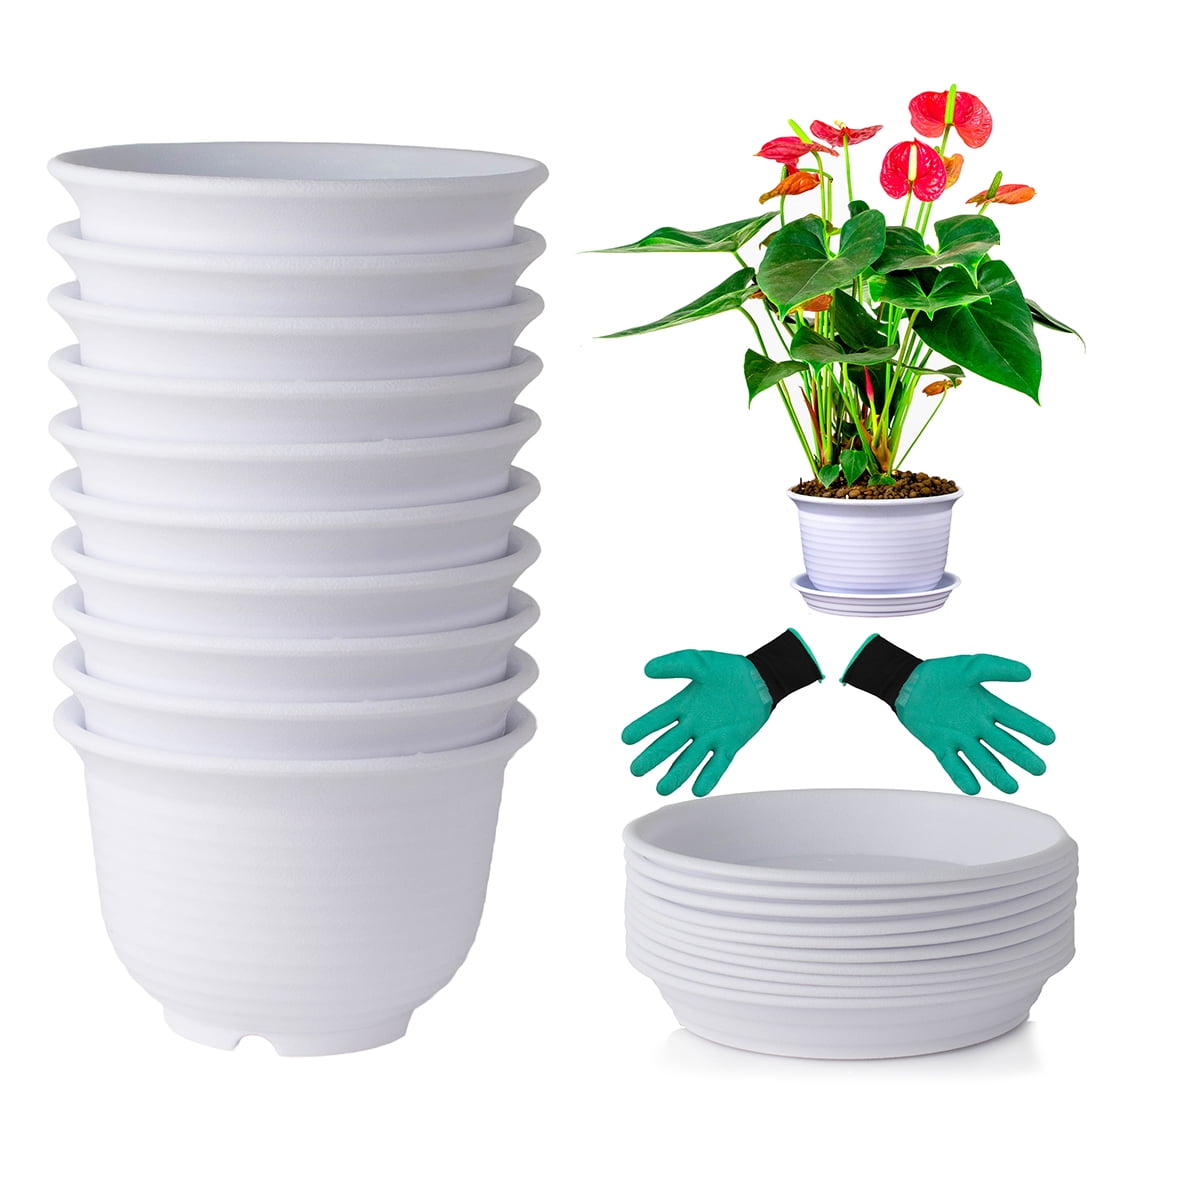 8-3/4" at Bottom 5 10" 10 Inch Vinyl Plastic Pot Saucers for House Plants 